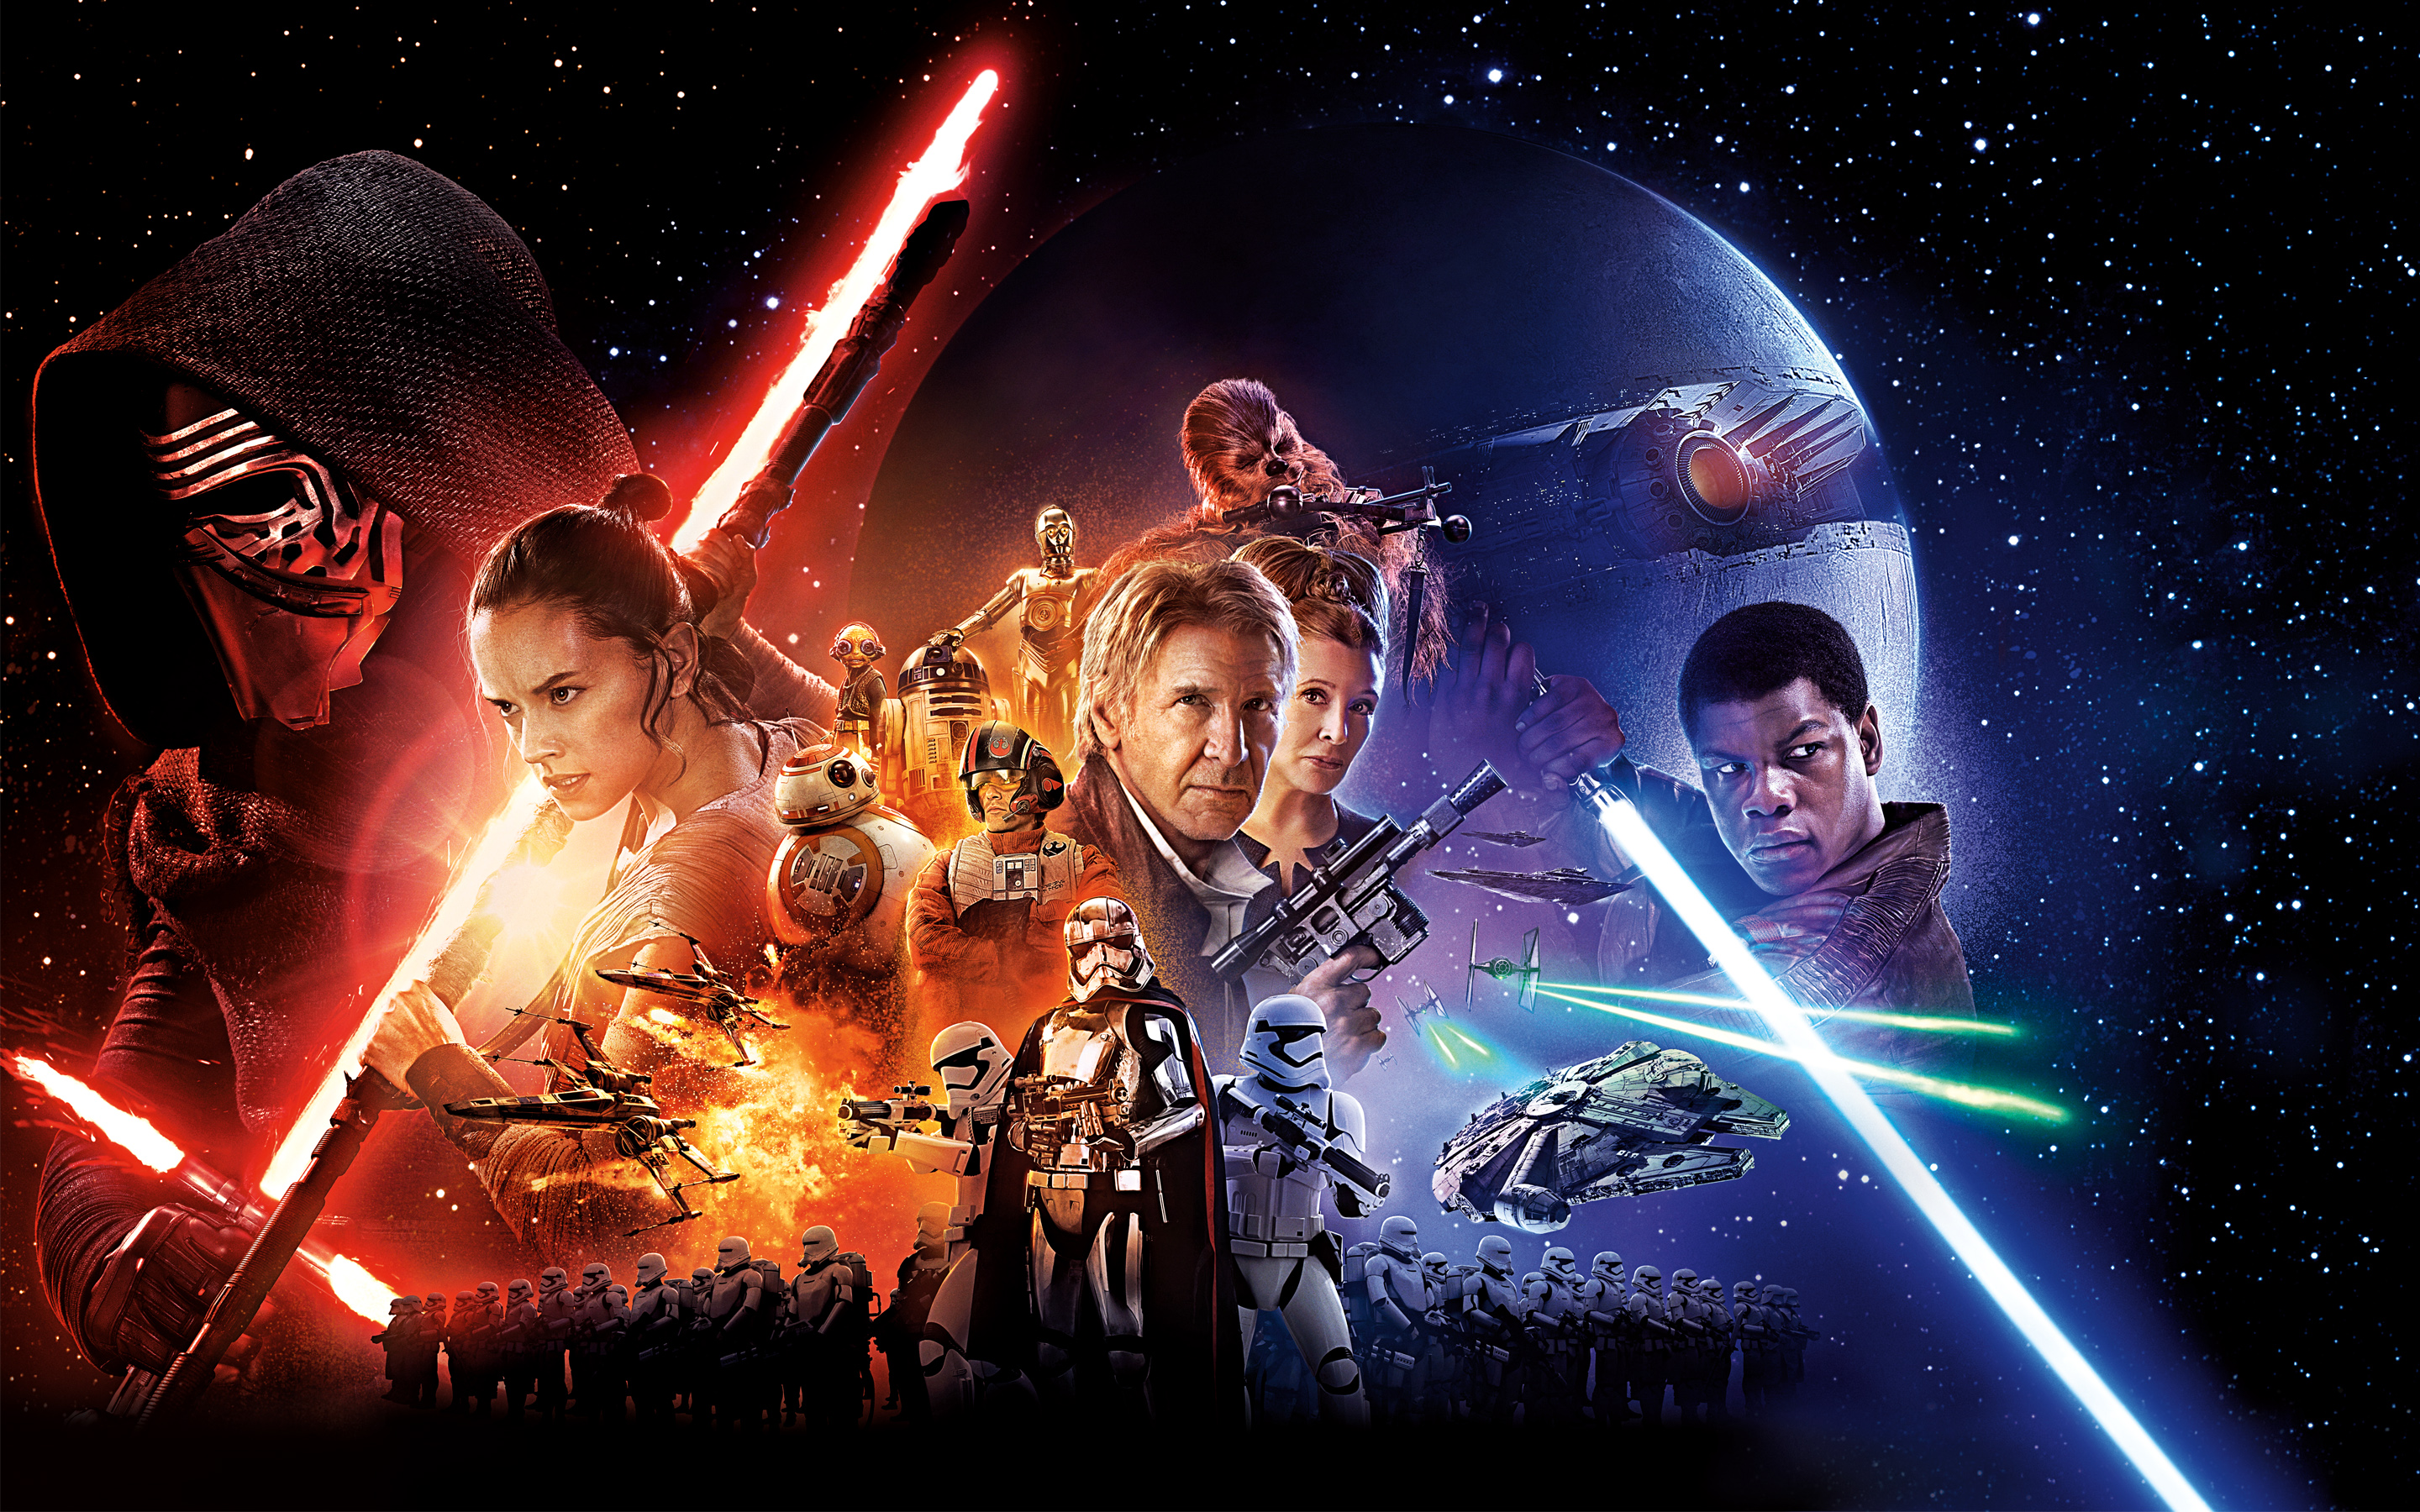  Wars Episode VII The Force Awakens Movie Wallpapers HD Wallpapers 2880x1800